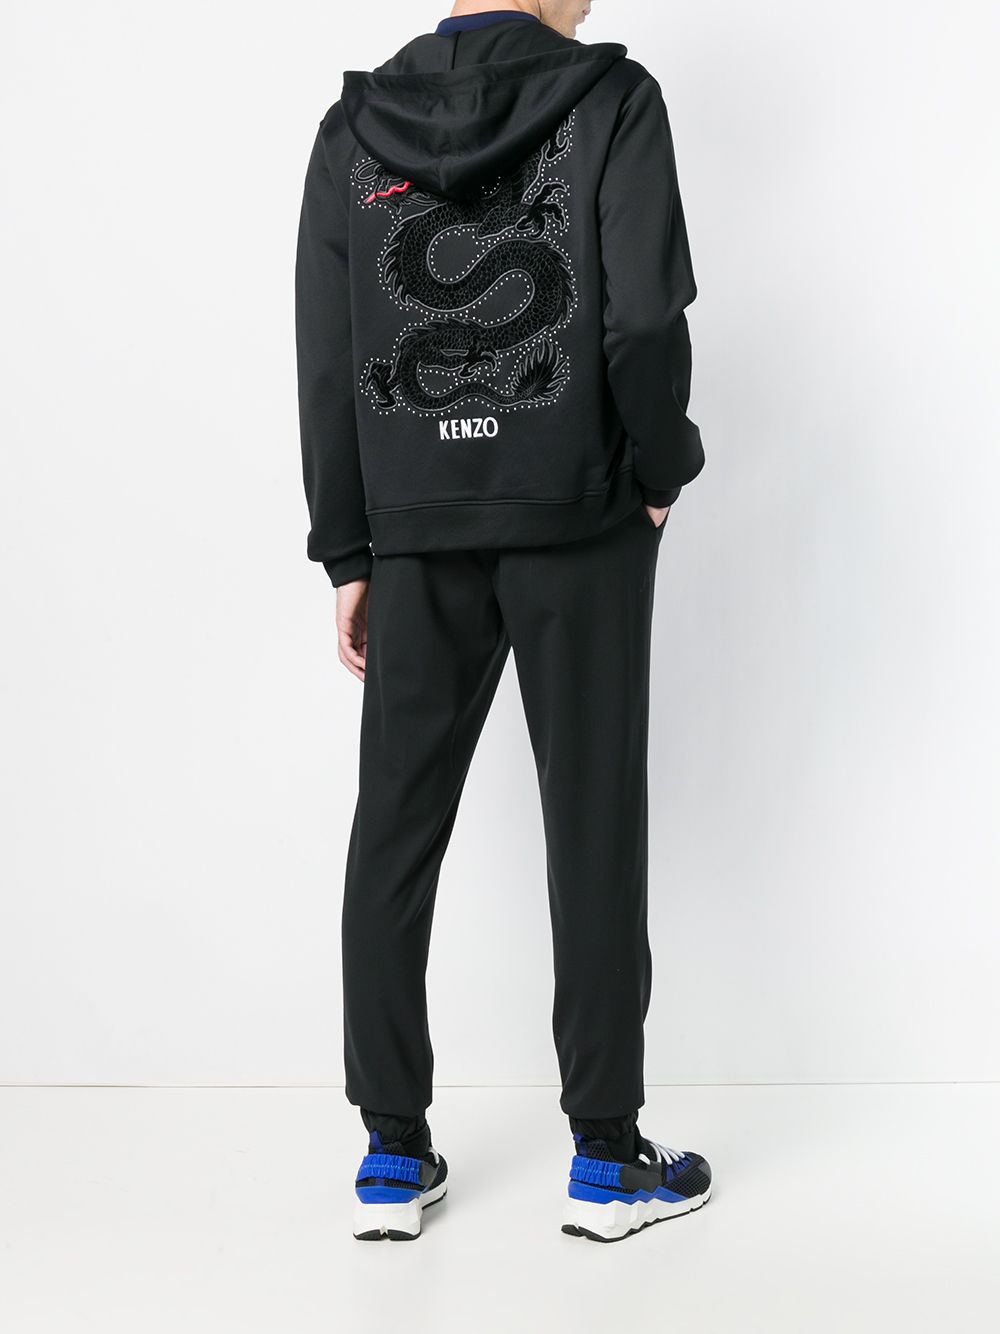 Kenzo Dragon Embroidery Zip Front Hoodie - Farfetch